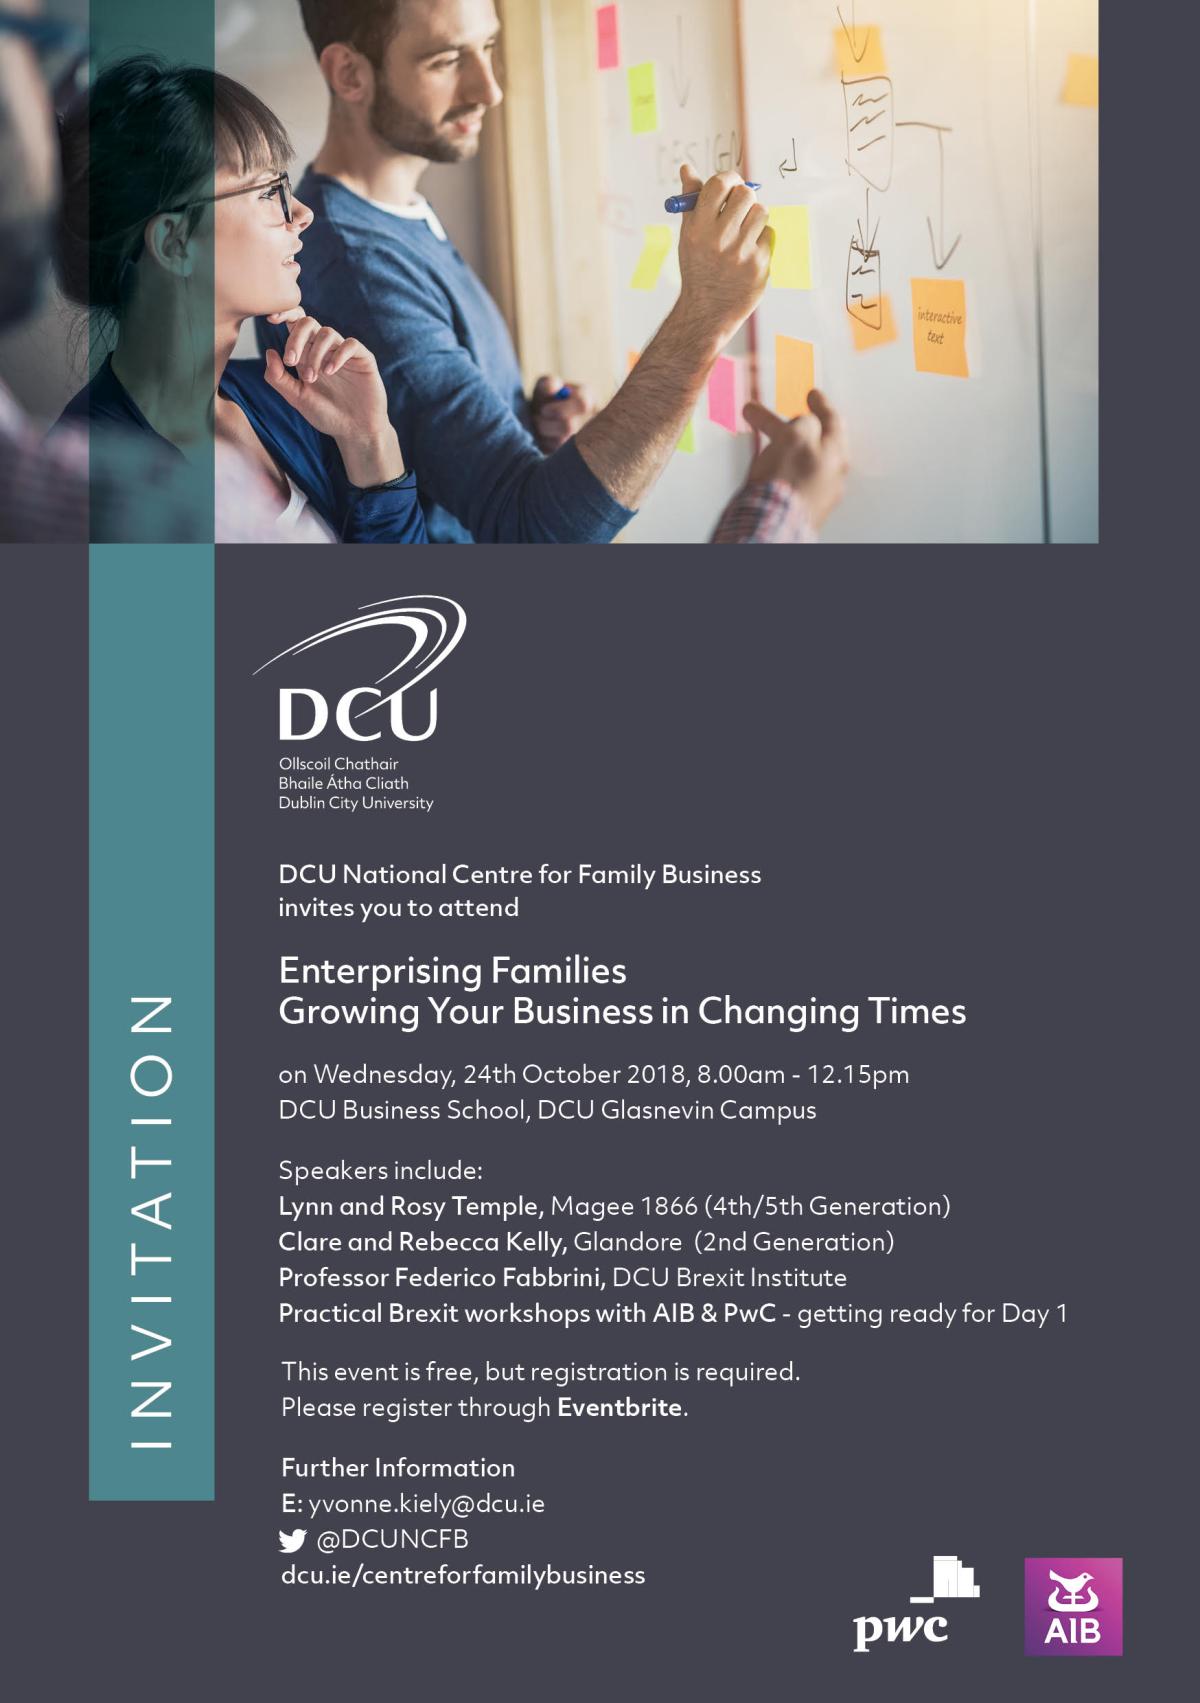 Enterprising Families: Growing Your Business in Changing Times